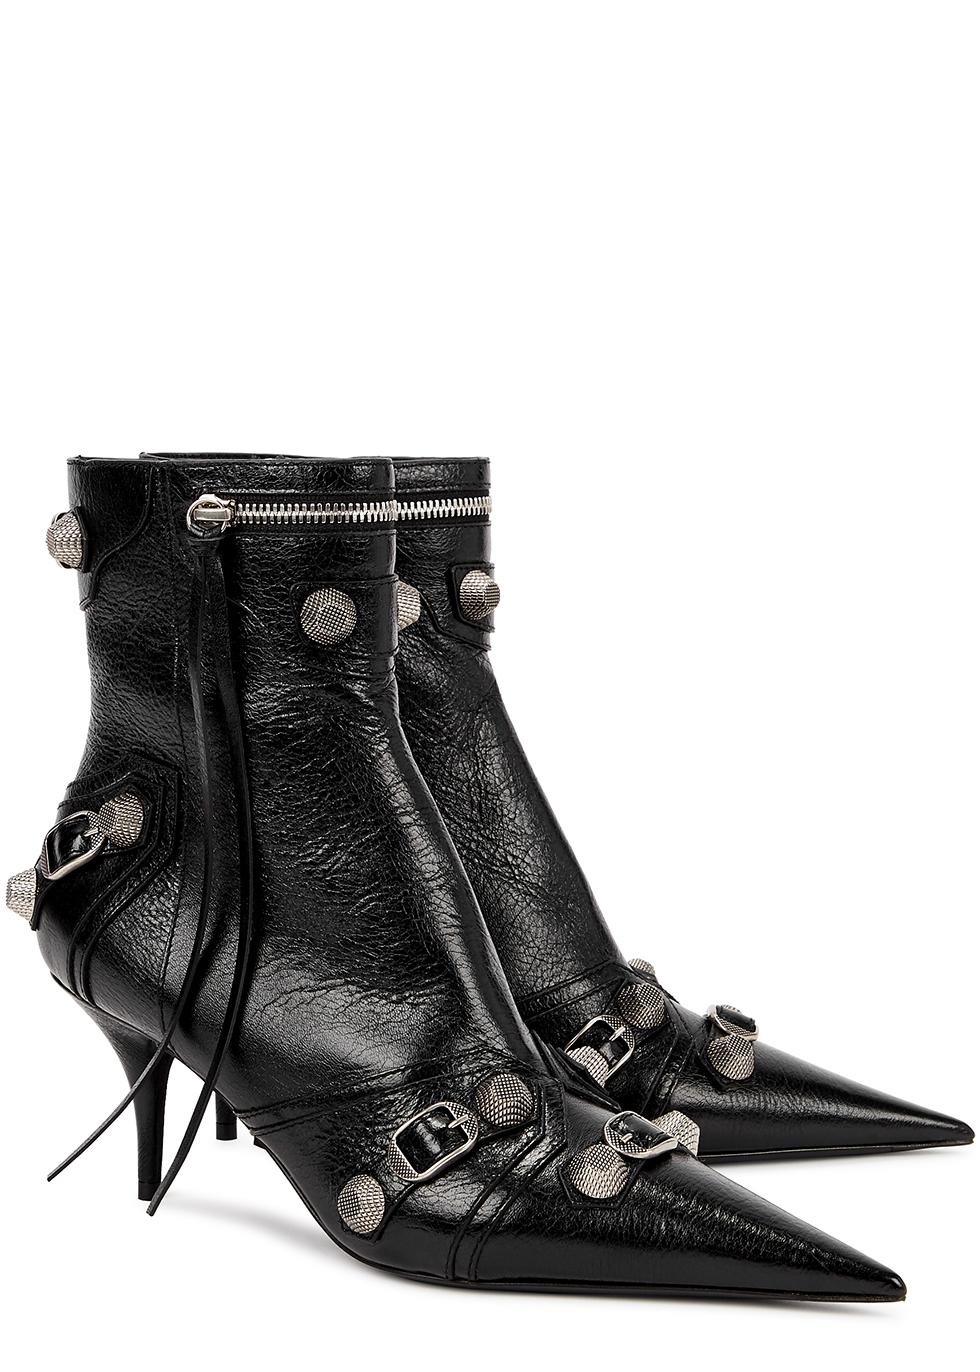 Balenciaga Black Strike Boots with painted effect on Garmentory  Boots  Balenciaga black Balenciaga